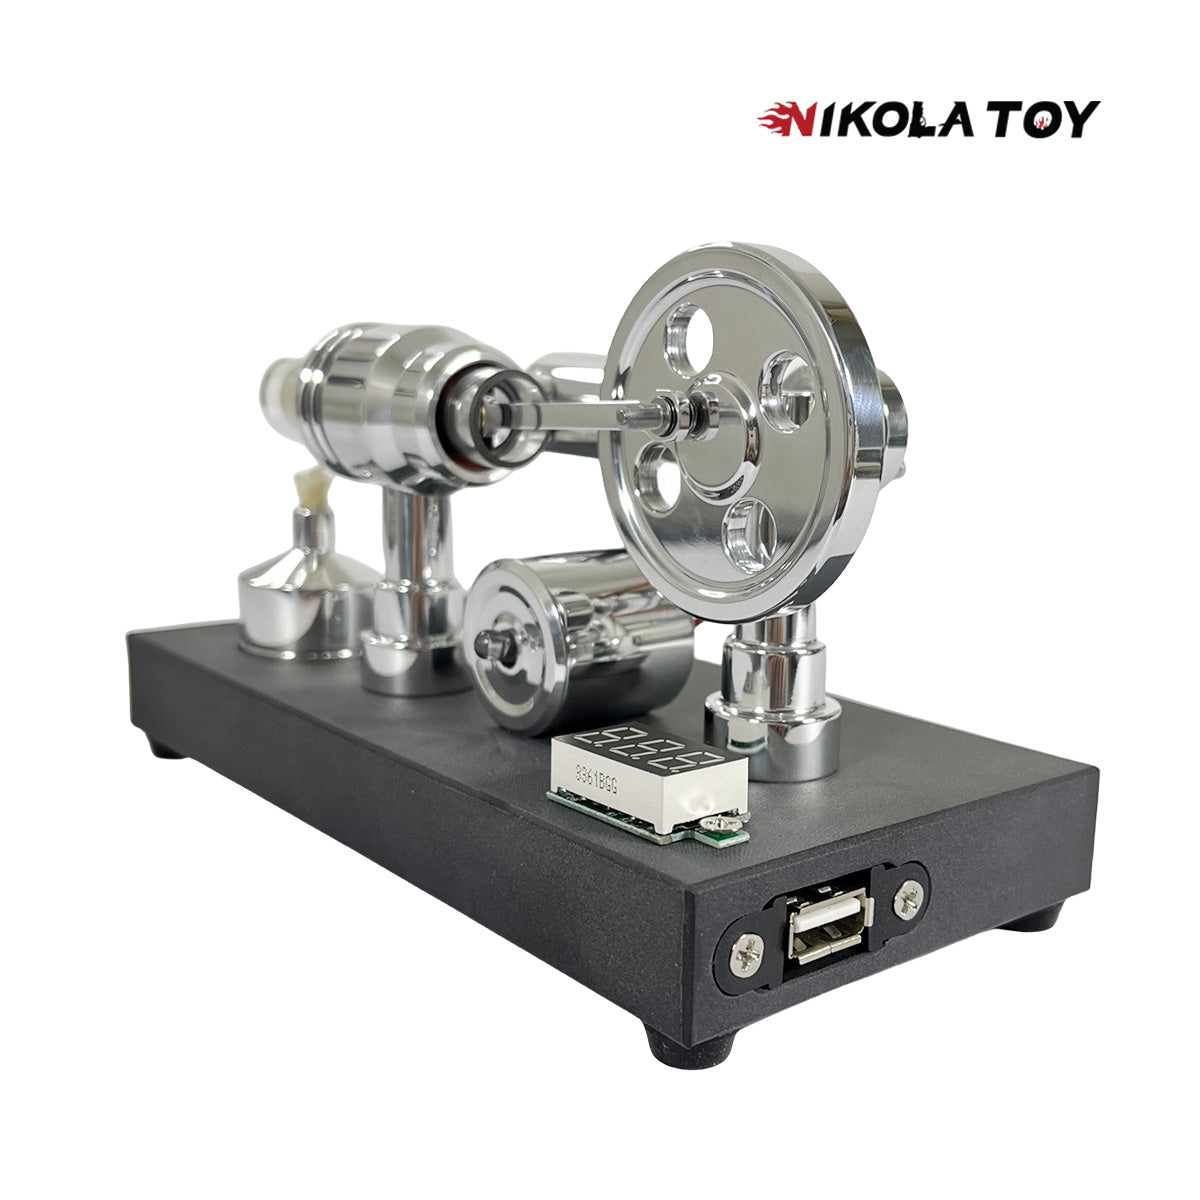 Mirror polished Stirling engine with embedded voltmeter and USB plug